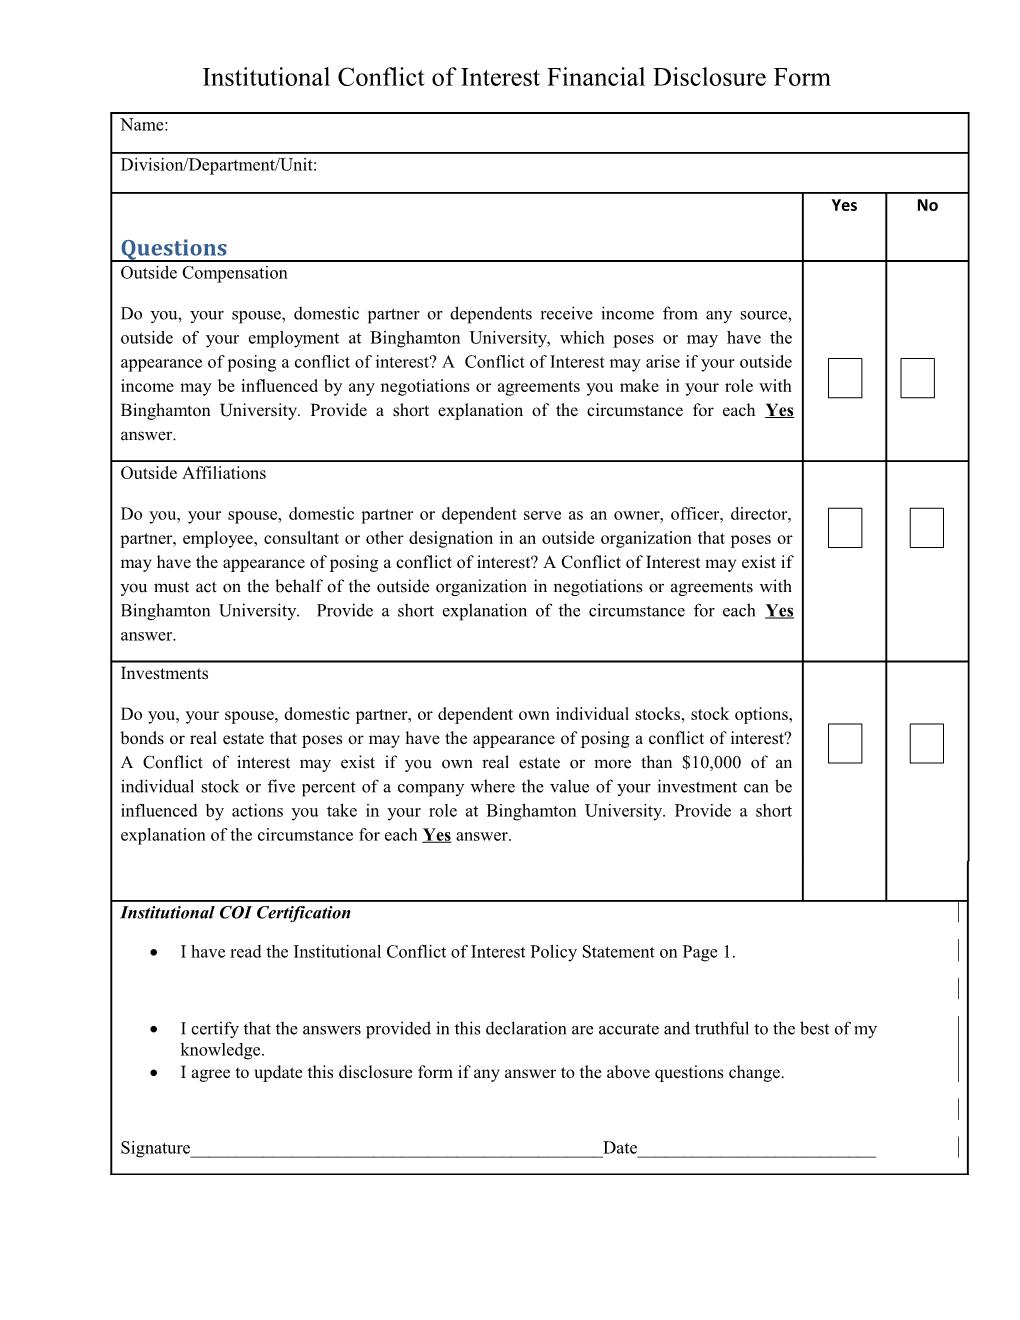 Institutional Conflict of Interest Financial Disclosure Form